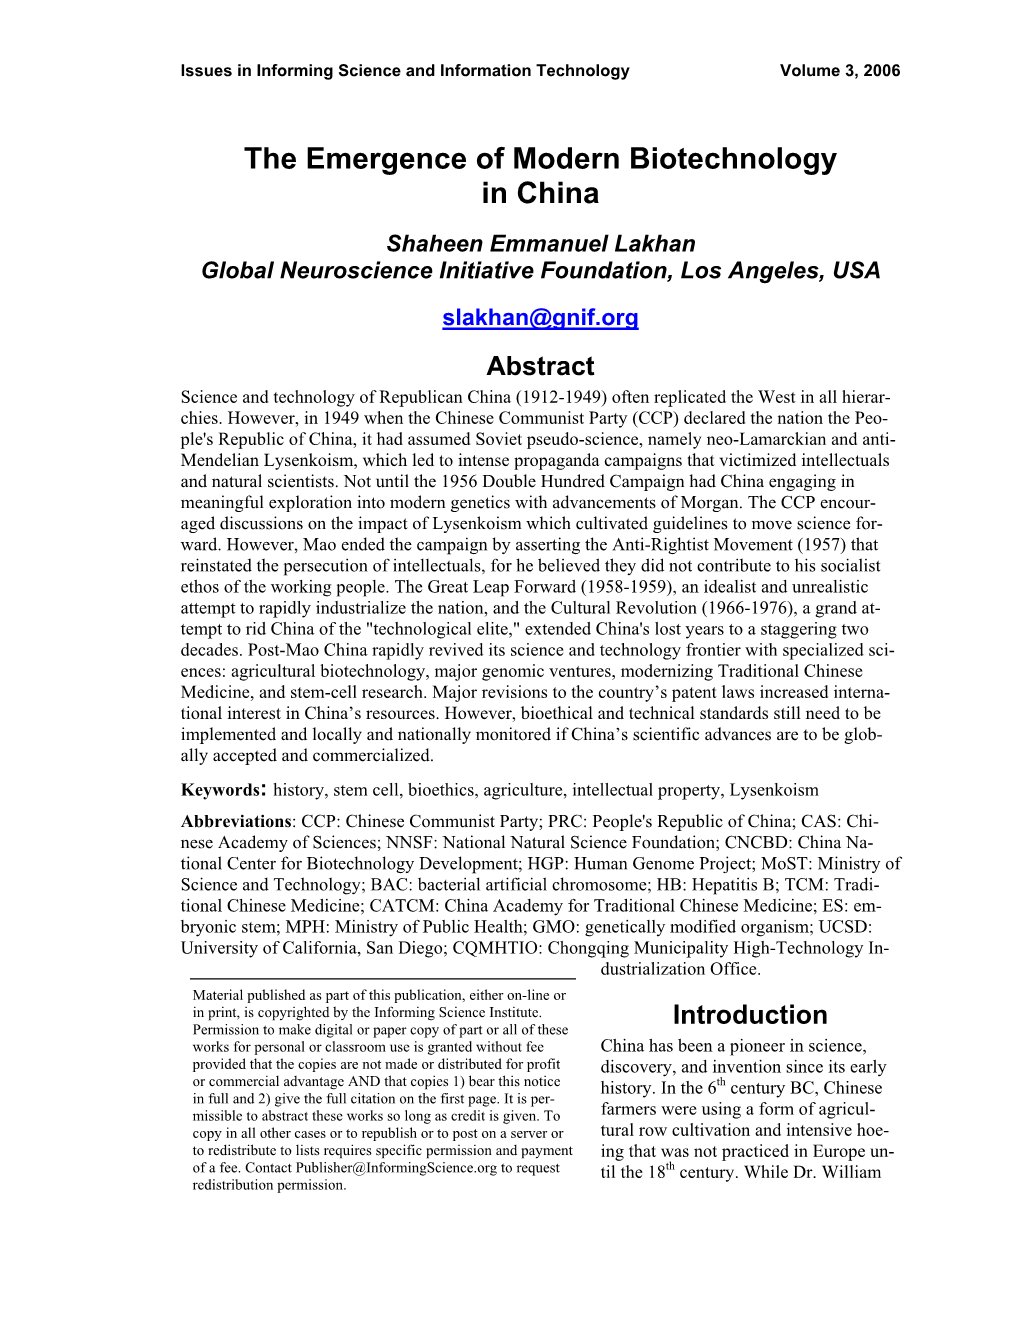 The Emergence of Modern Biotechnology in China